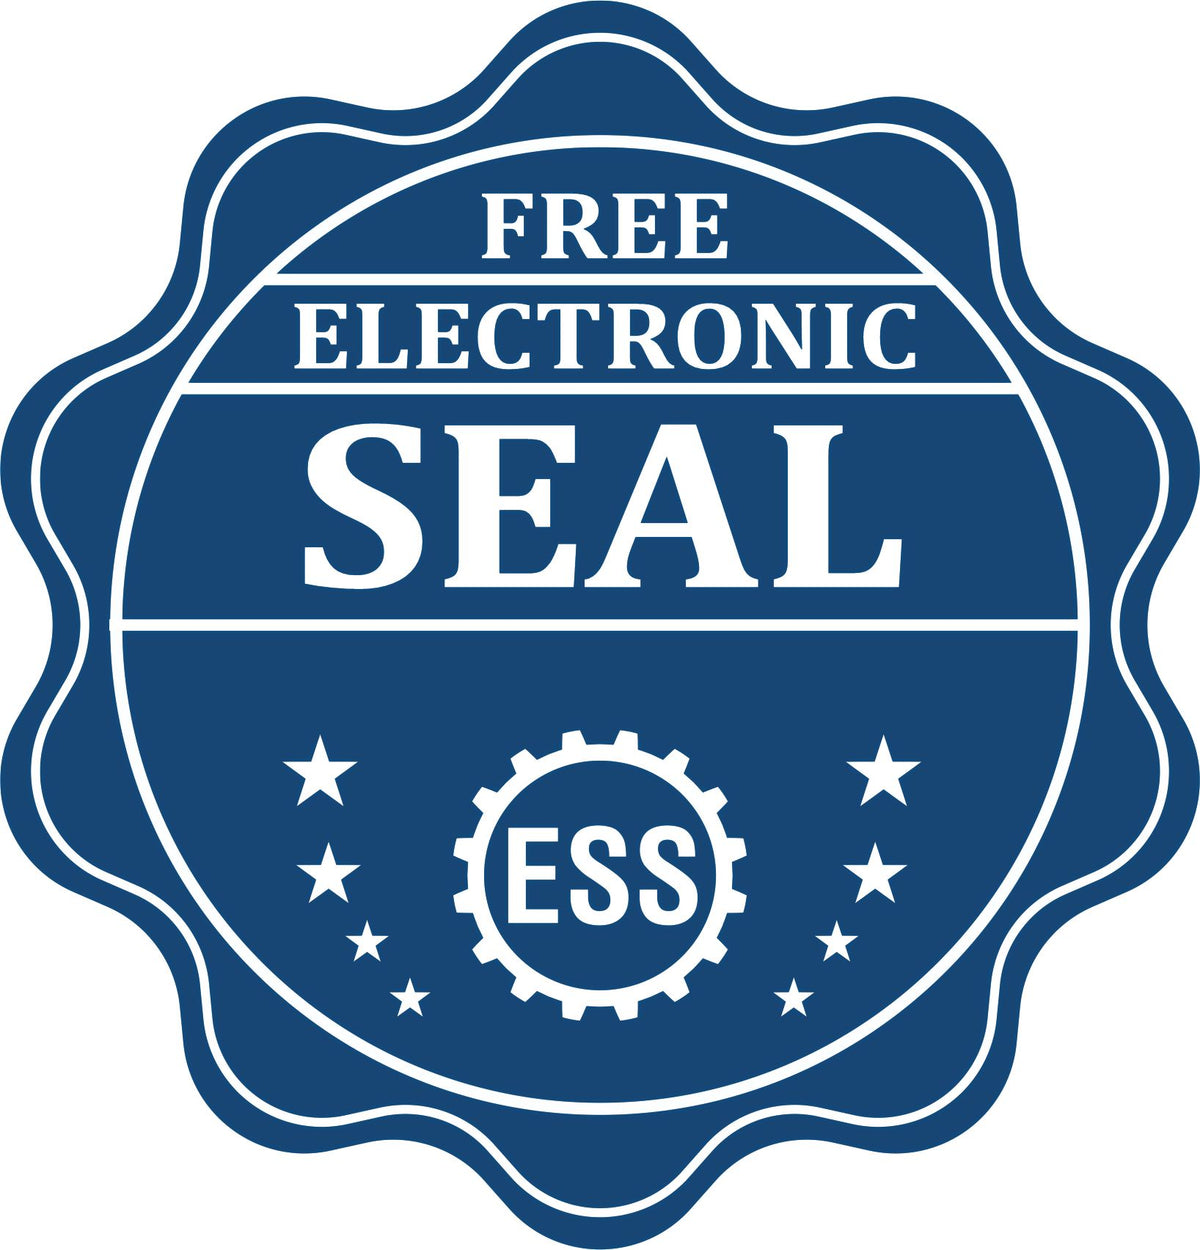 A badge showing a free electronic seal for the Premium MaxLight Pre-Inked Connecticut Geology Stamp with stars and the ESS gear on the emblem.